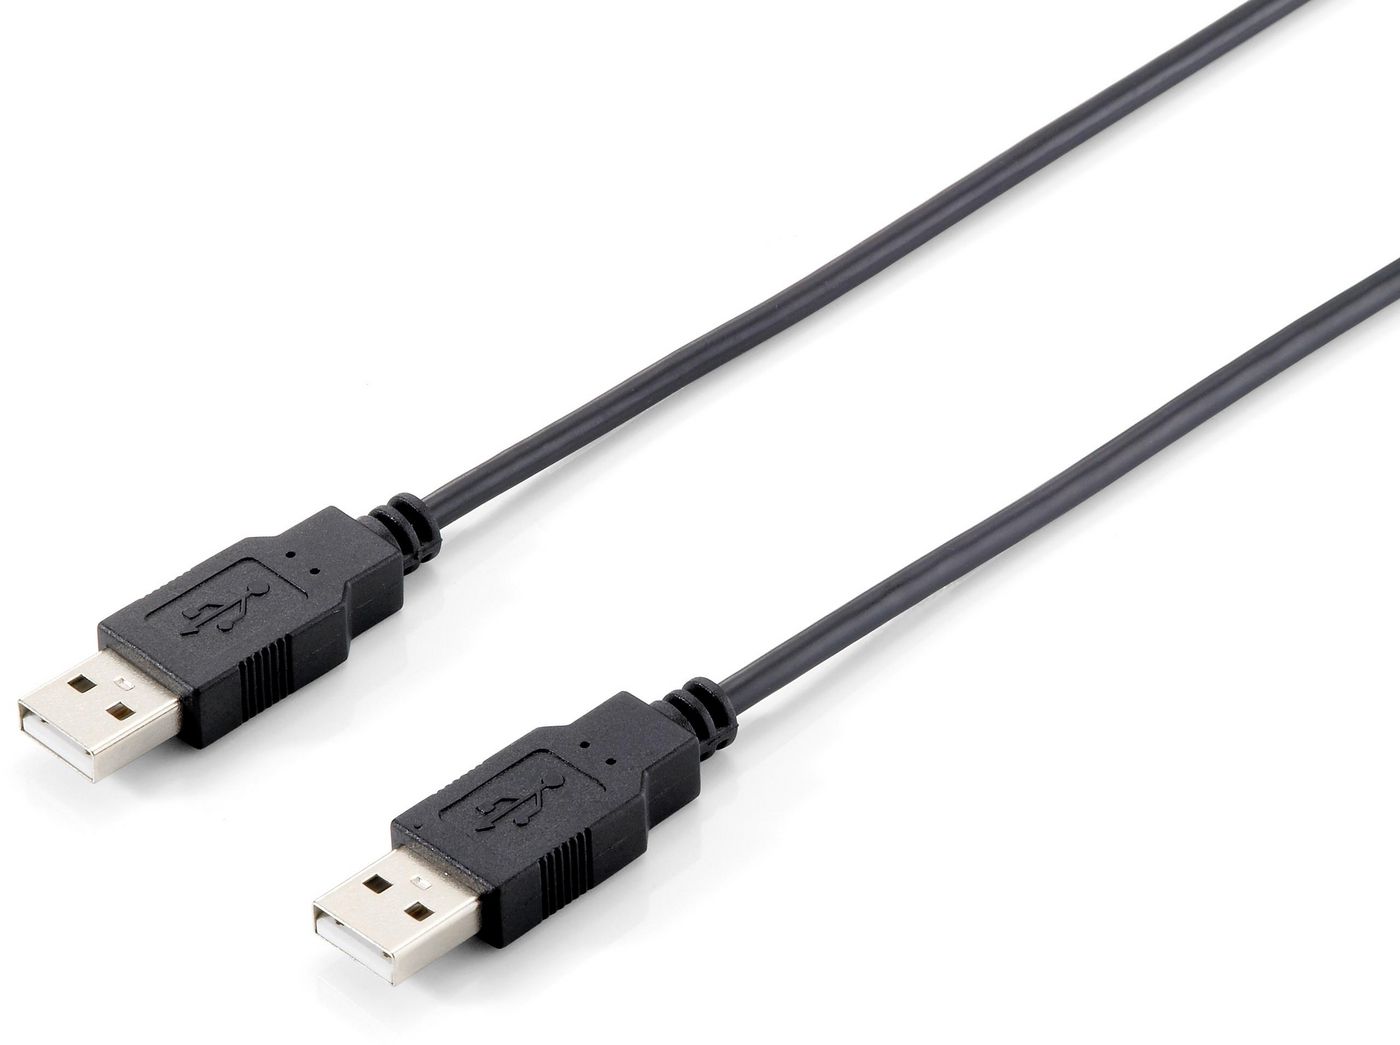 Equip 128871 W128292483 Usb 2.0 Type A Cable, 3.0M , 